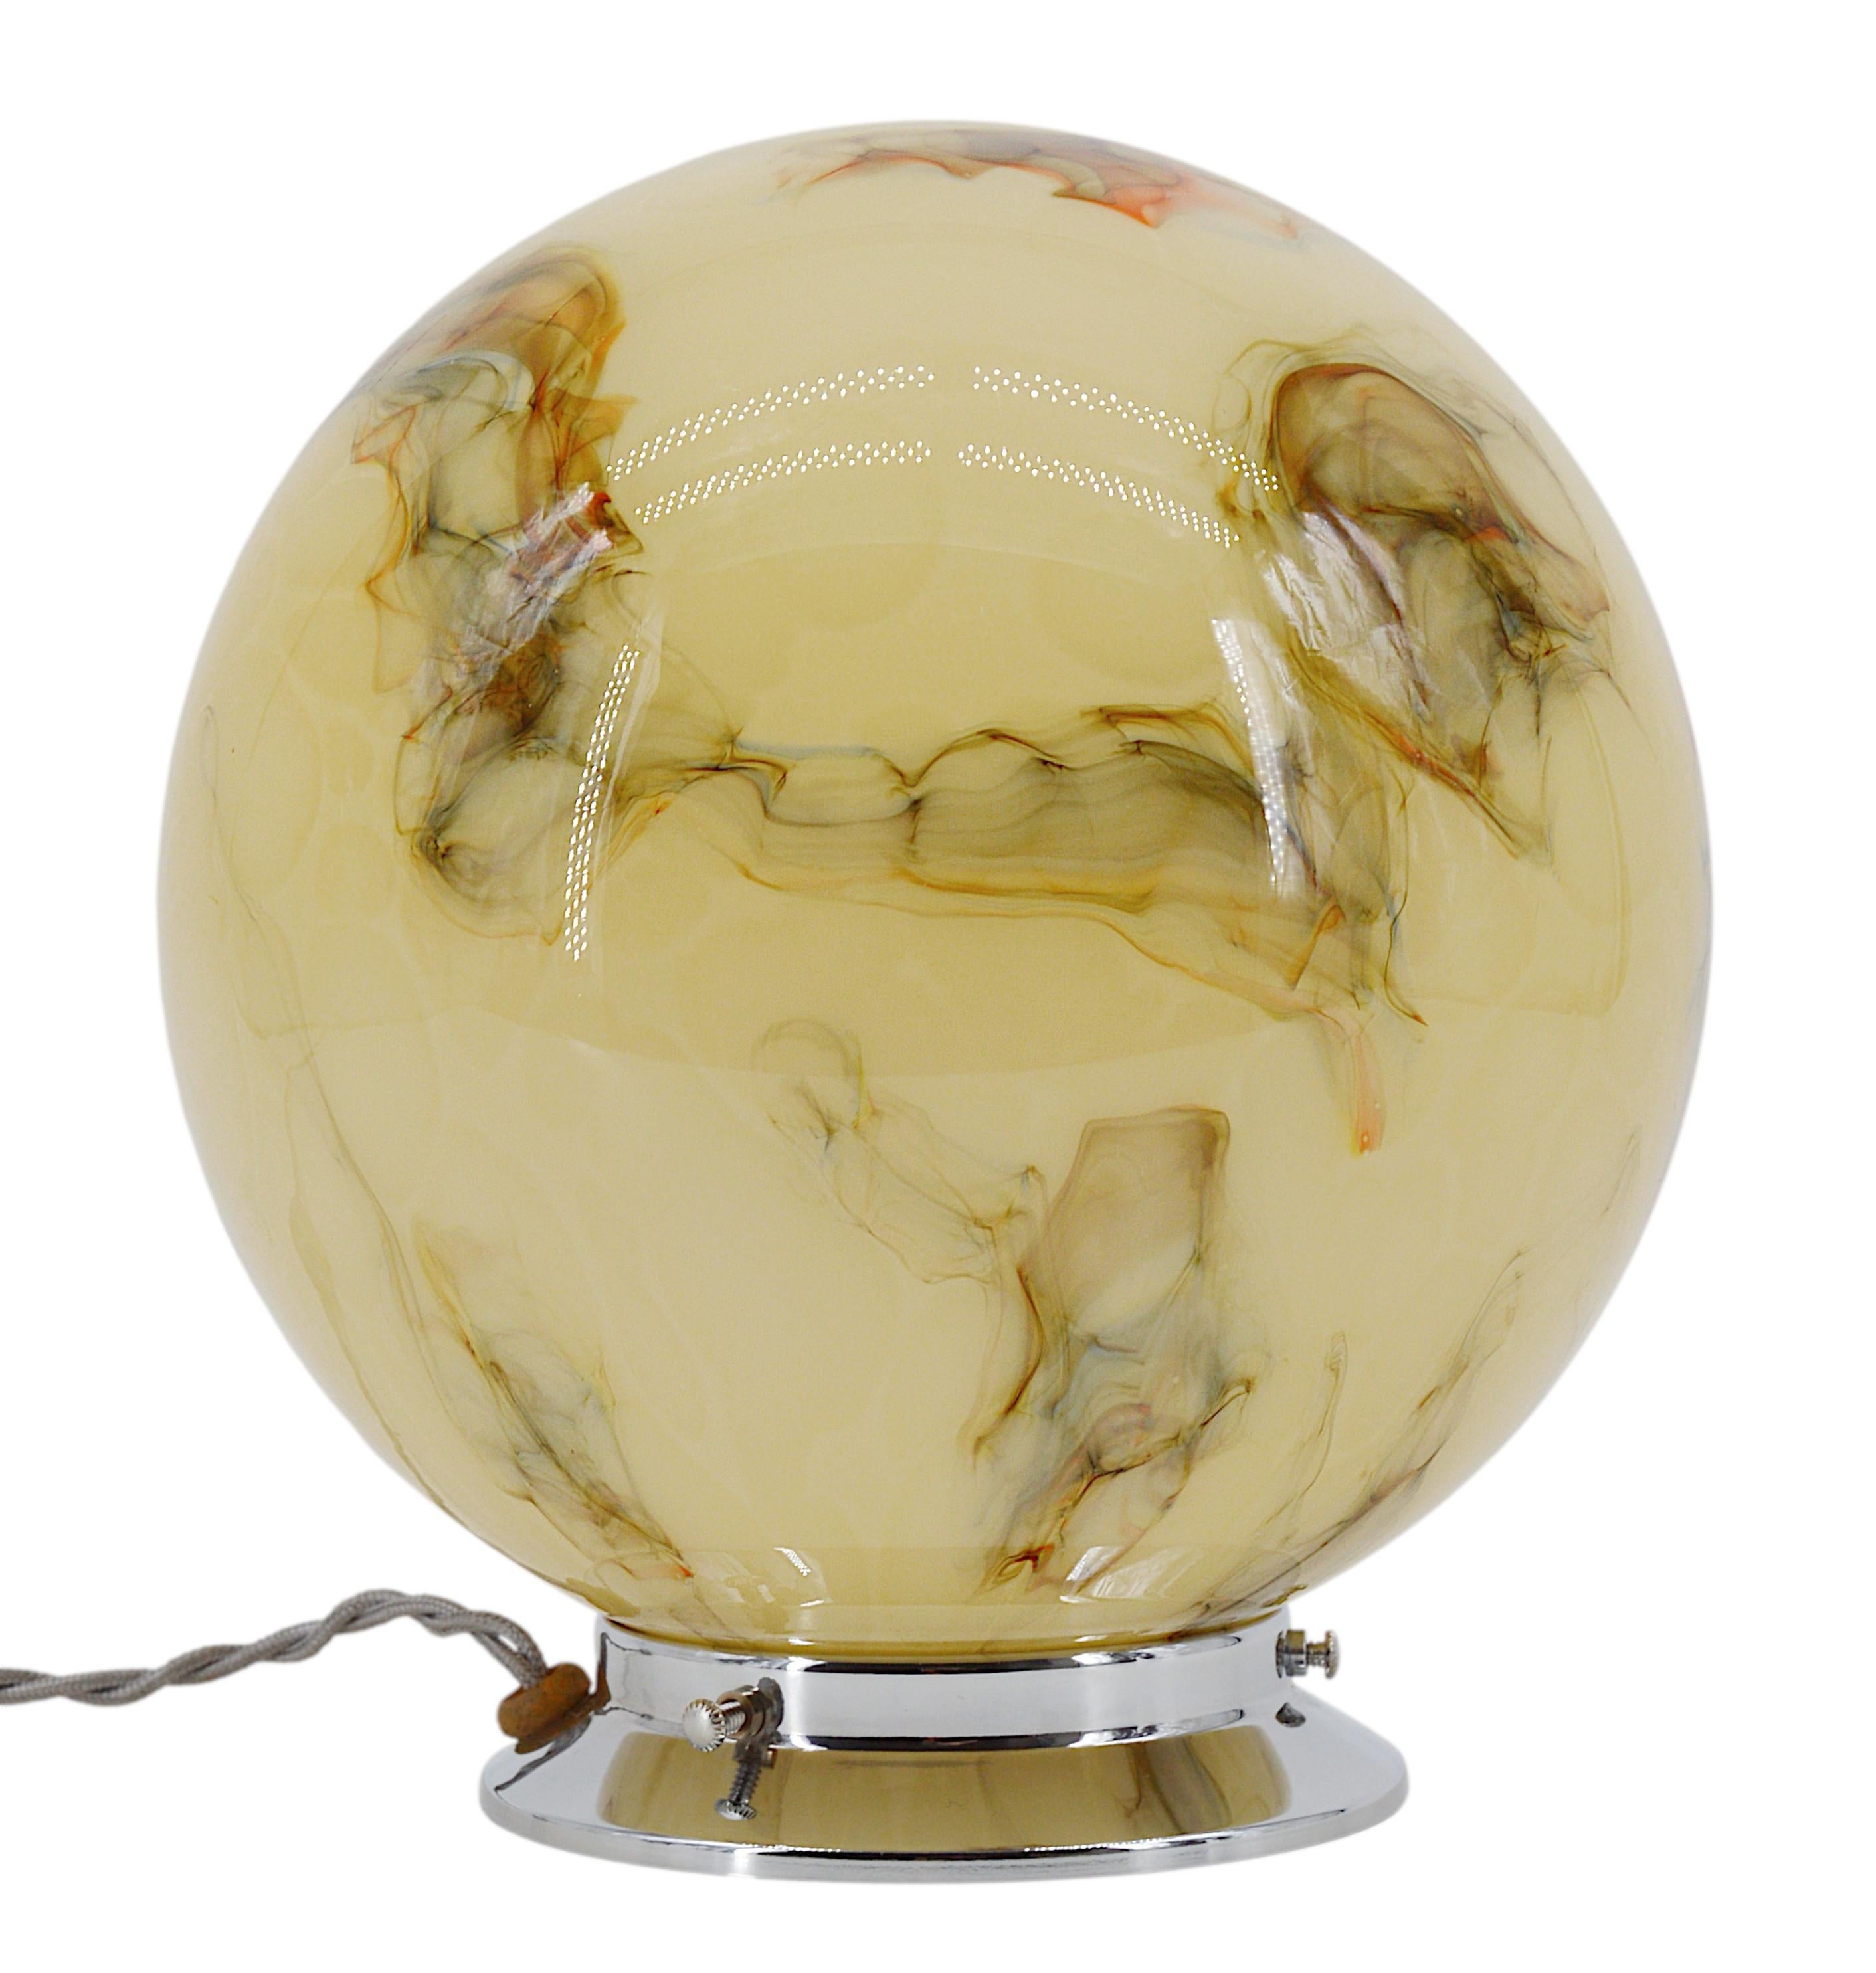 French Art Deco table lamp, France, 1930s. Glass globe with marble decoration on its chrome frame. Height : 21cm - 8.3 inches ; Diameter : 20cm - 7.9 inches. Delivered wired for your country (US, UK, EU, Australia, etc). LED can be used